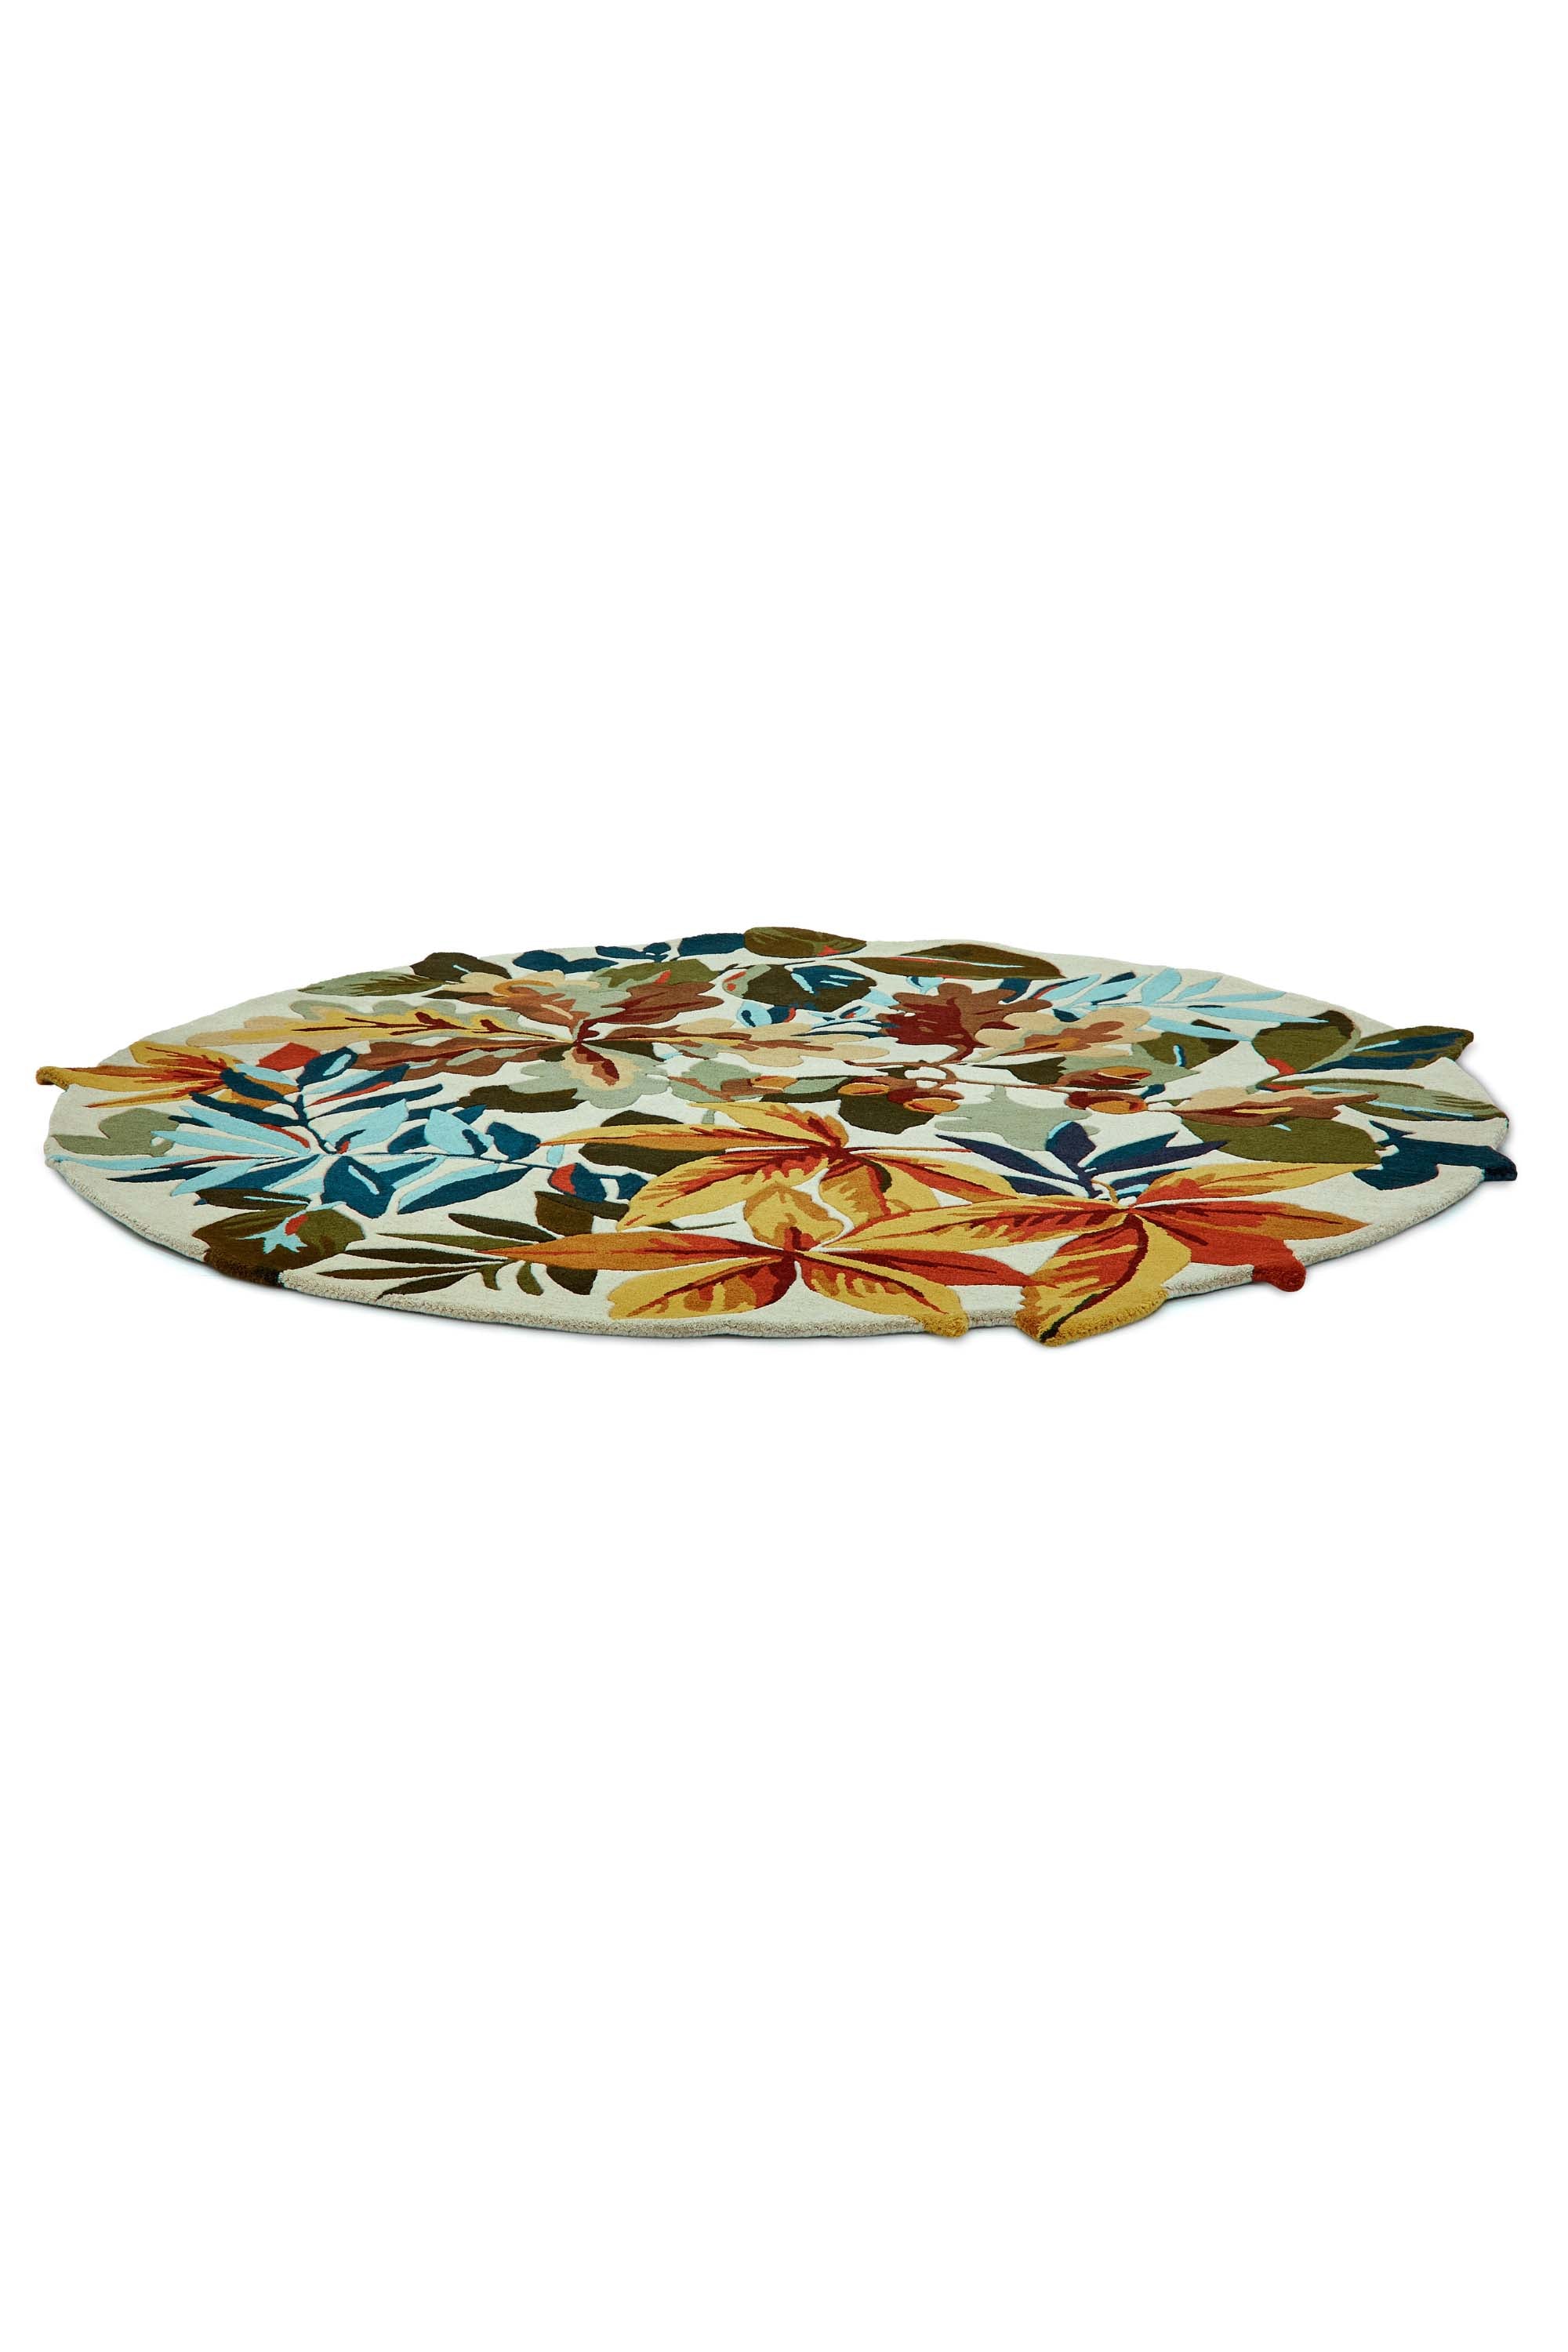 Circle floral rug with extruding pattern in neutral tones